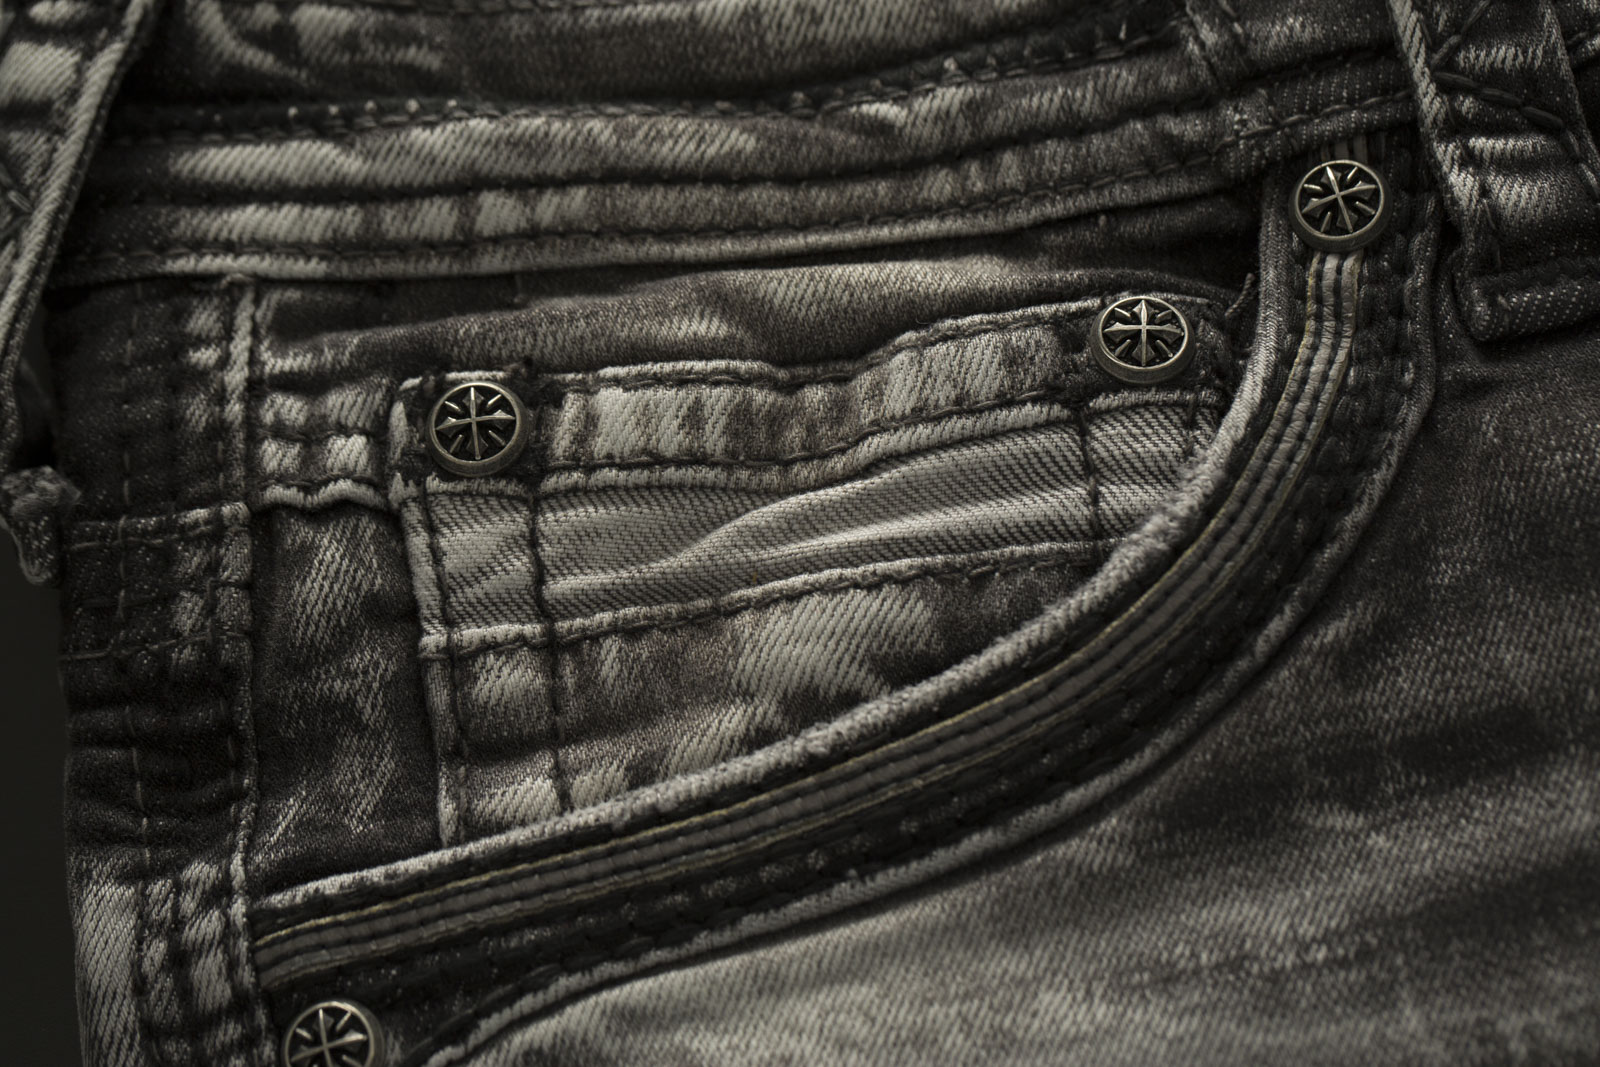 Affliction Jeans Ace Armor Bones with holes and tears